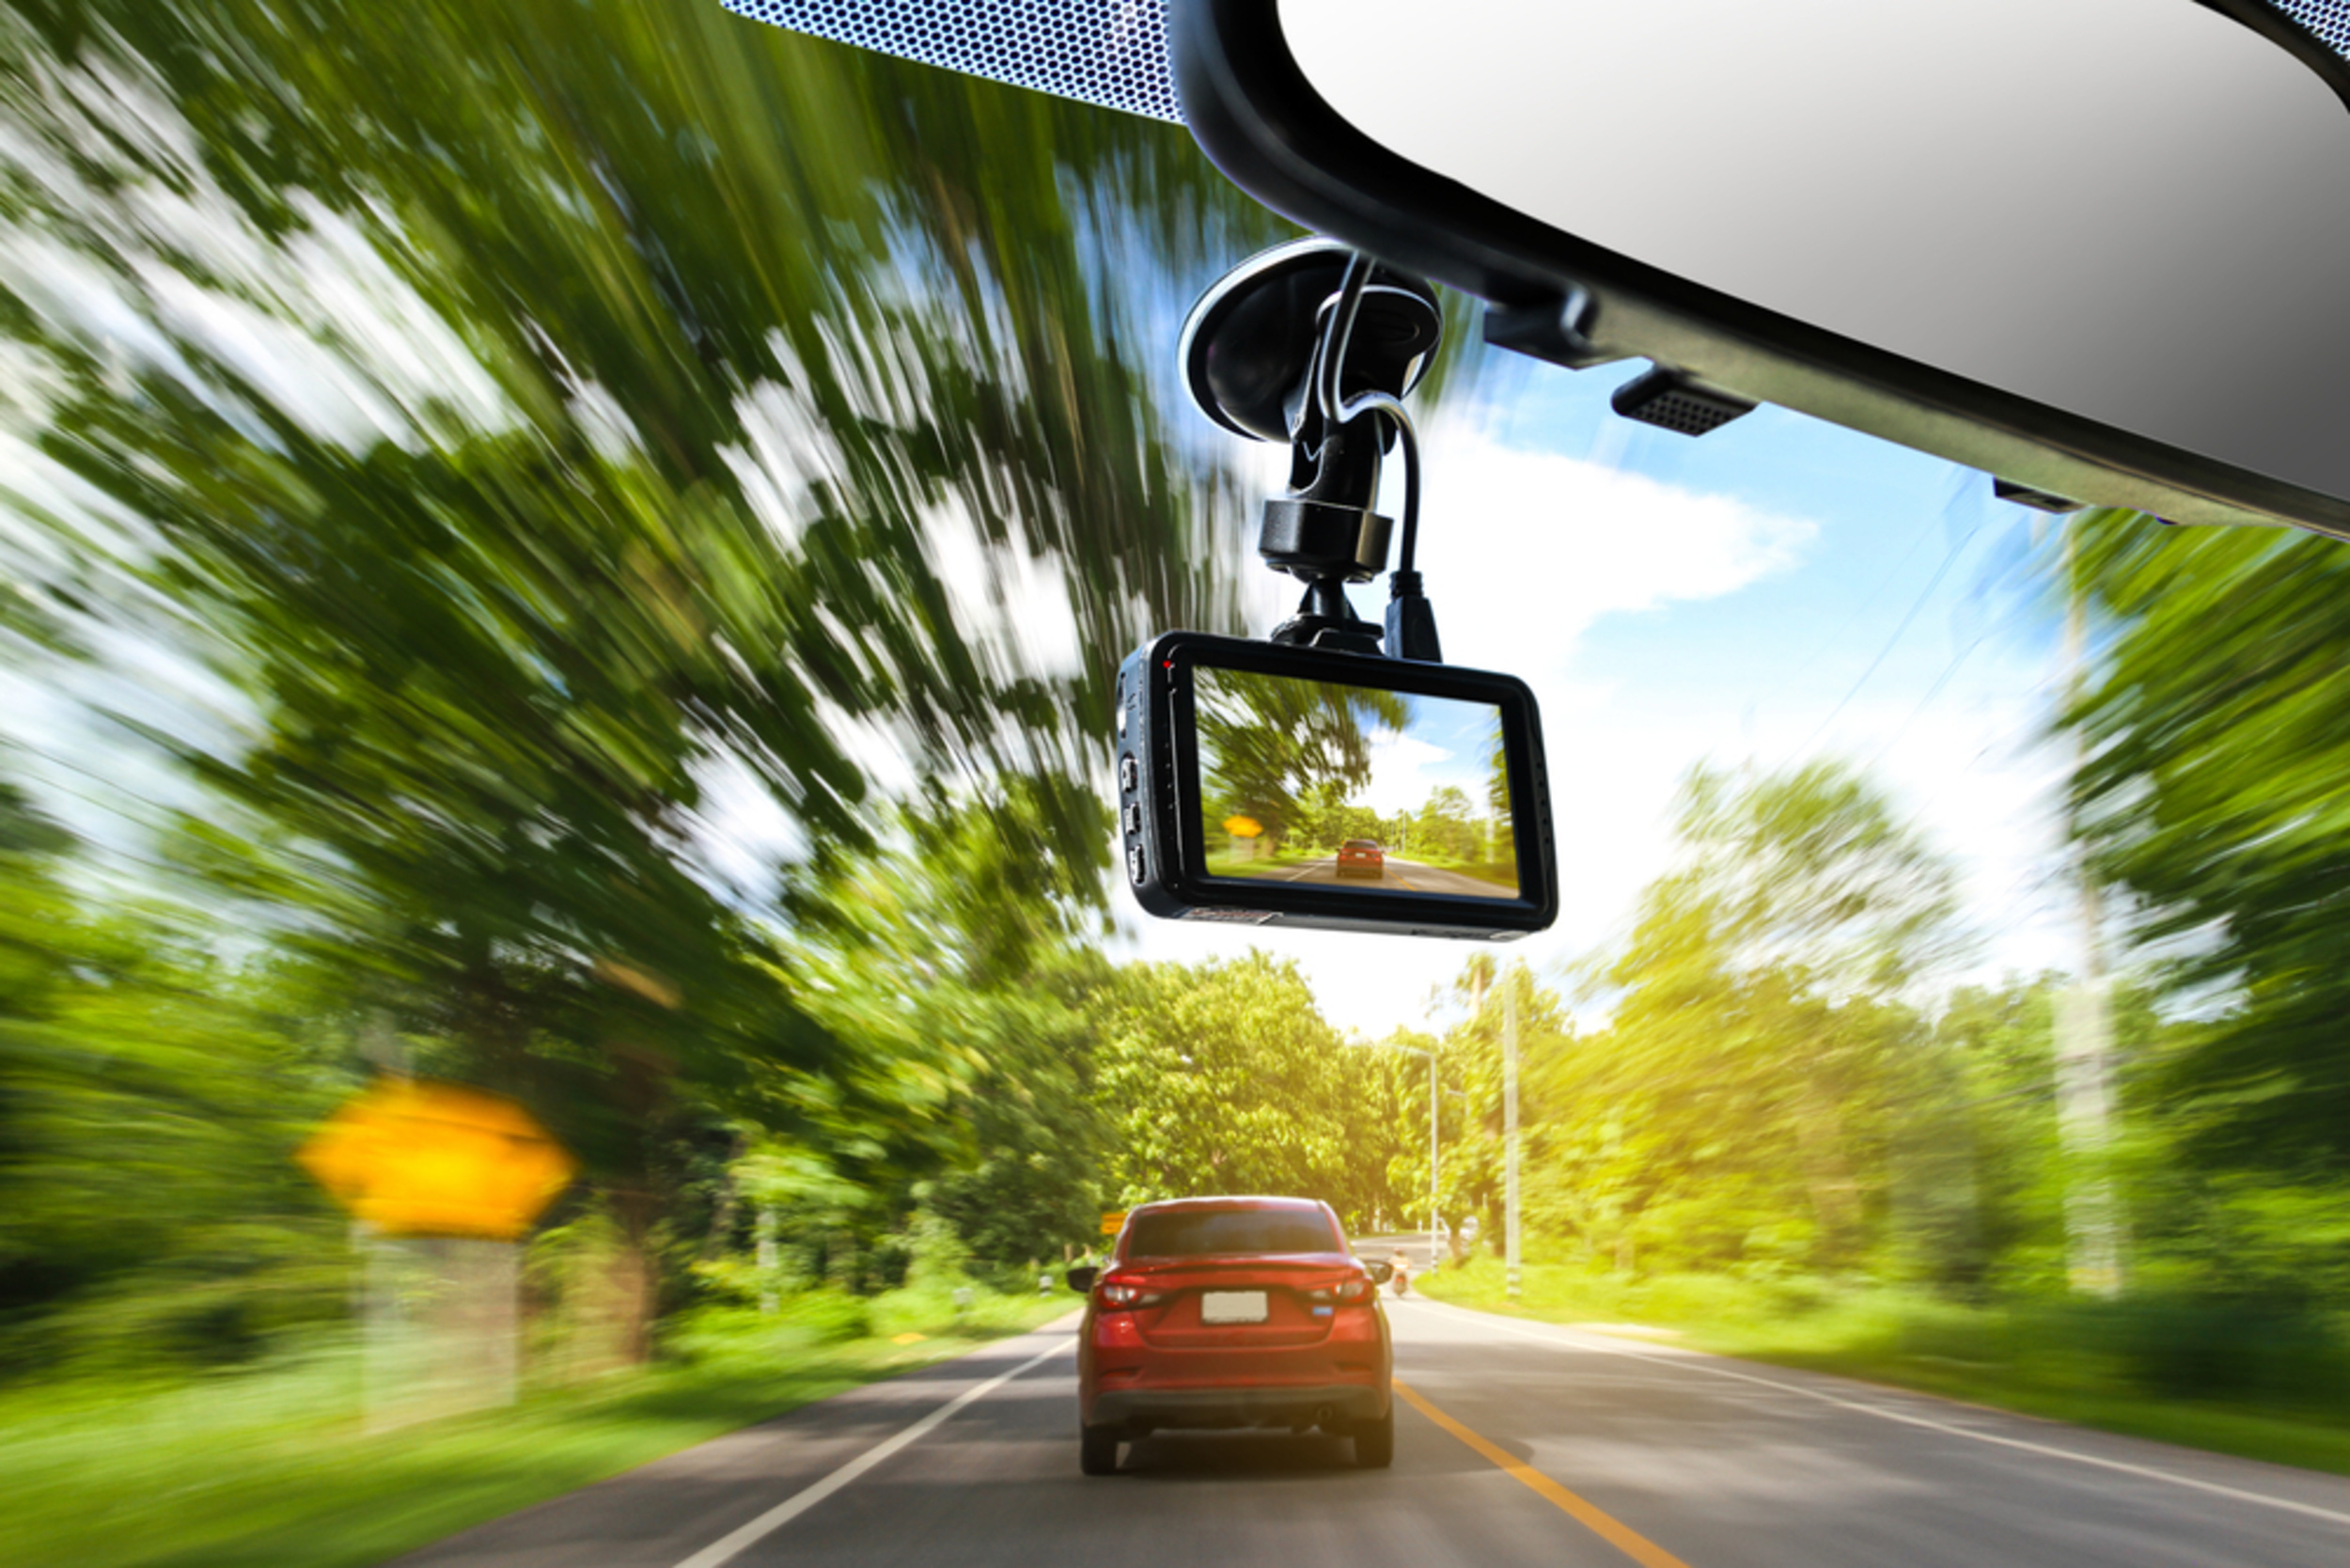 <p>Dash cameras are an inexpensive and fun way to bring home a totally unique souvenir from your road trip. Just mount the camera to your dash, and start driving. Once you get back from the trip, you can review the footage and see the sights in a whole new way. </p><p><a href='https://www.msn.com/en-us/community/channel/vid-cj9pqbr0vn9in2b6ddcd8sfgpfq6x6utp44fssrv6mc2gtybw0us'>Follow us on MSN to see more of our exclusive lifestyle content.</a></p>